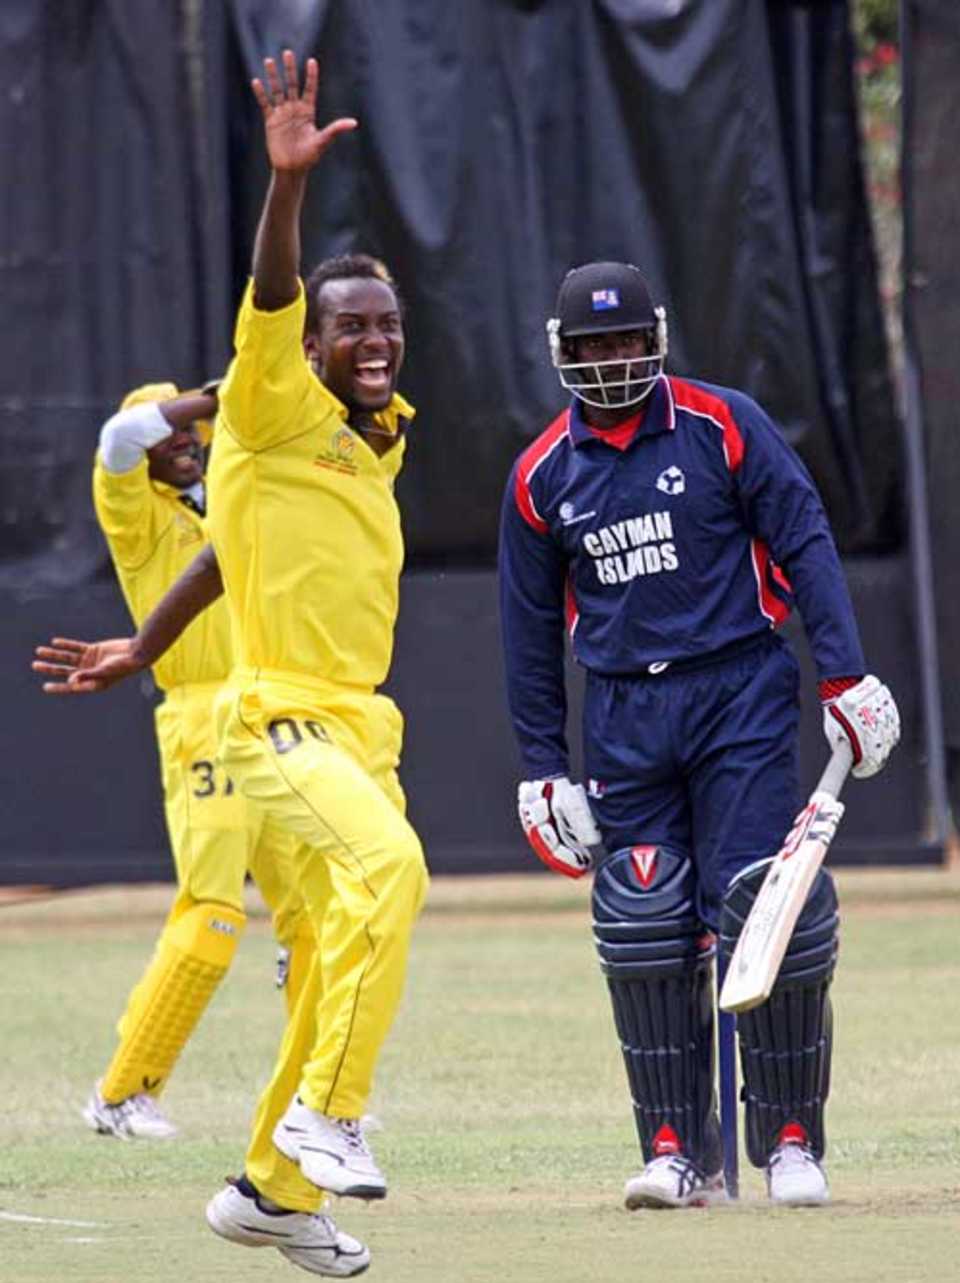 The in-form Kenneth Kamyuka puts in a strong appeal as Cayman Islands struggle, Cayman Islands v Uganda, World Cricket League, Buenos Aires, January 25, 2009